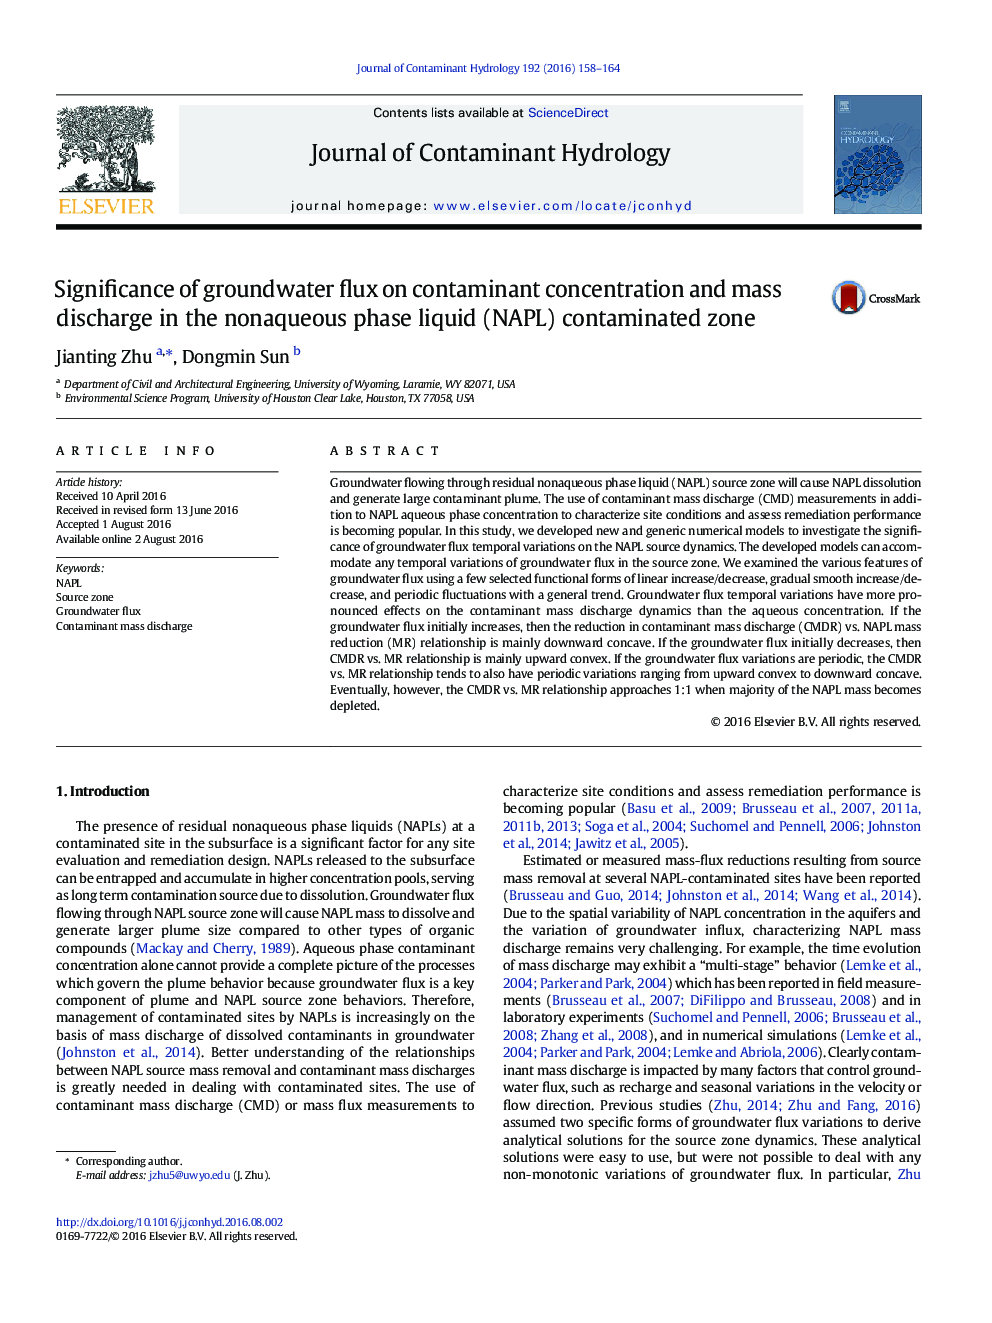 Significance of groundwater flux on contaminant concentration and mass discharge in the nonaqueous phase liquid (NAPL) contaminated zone